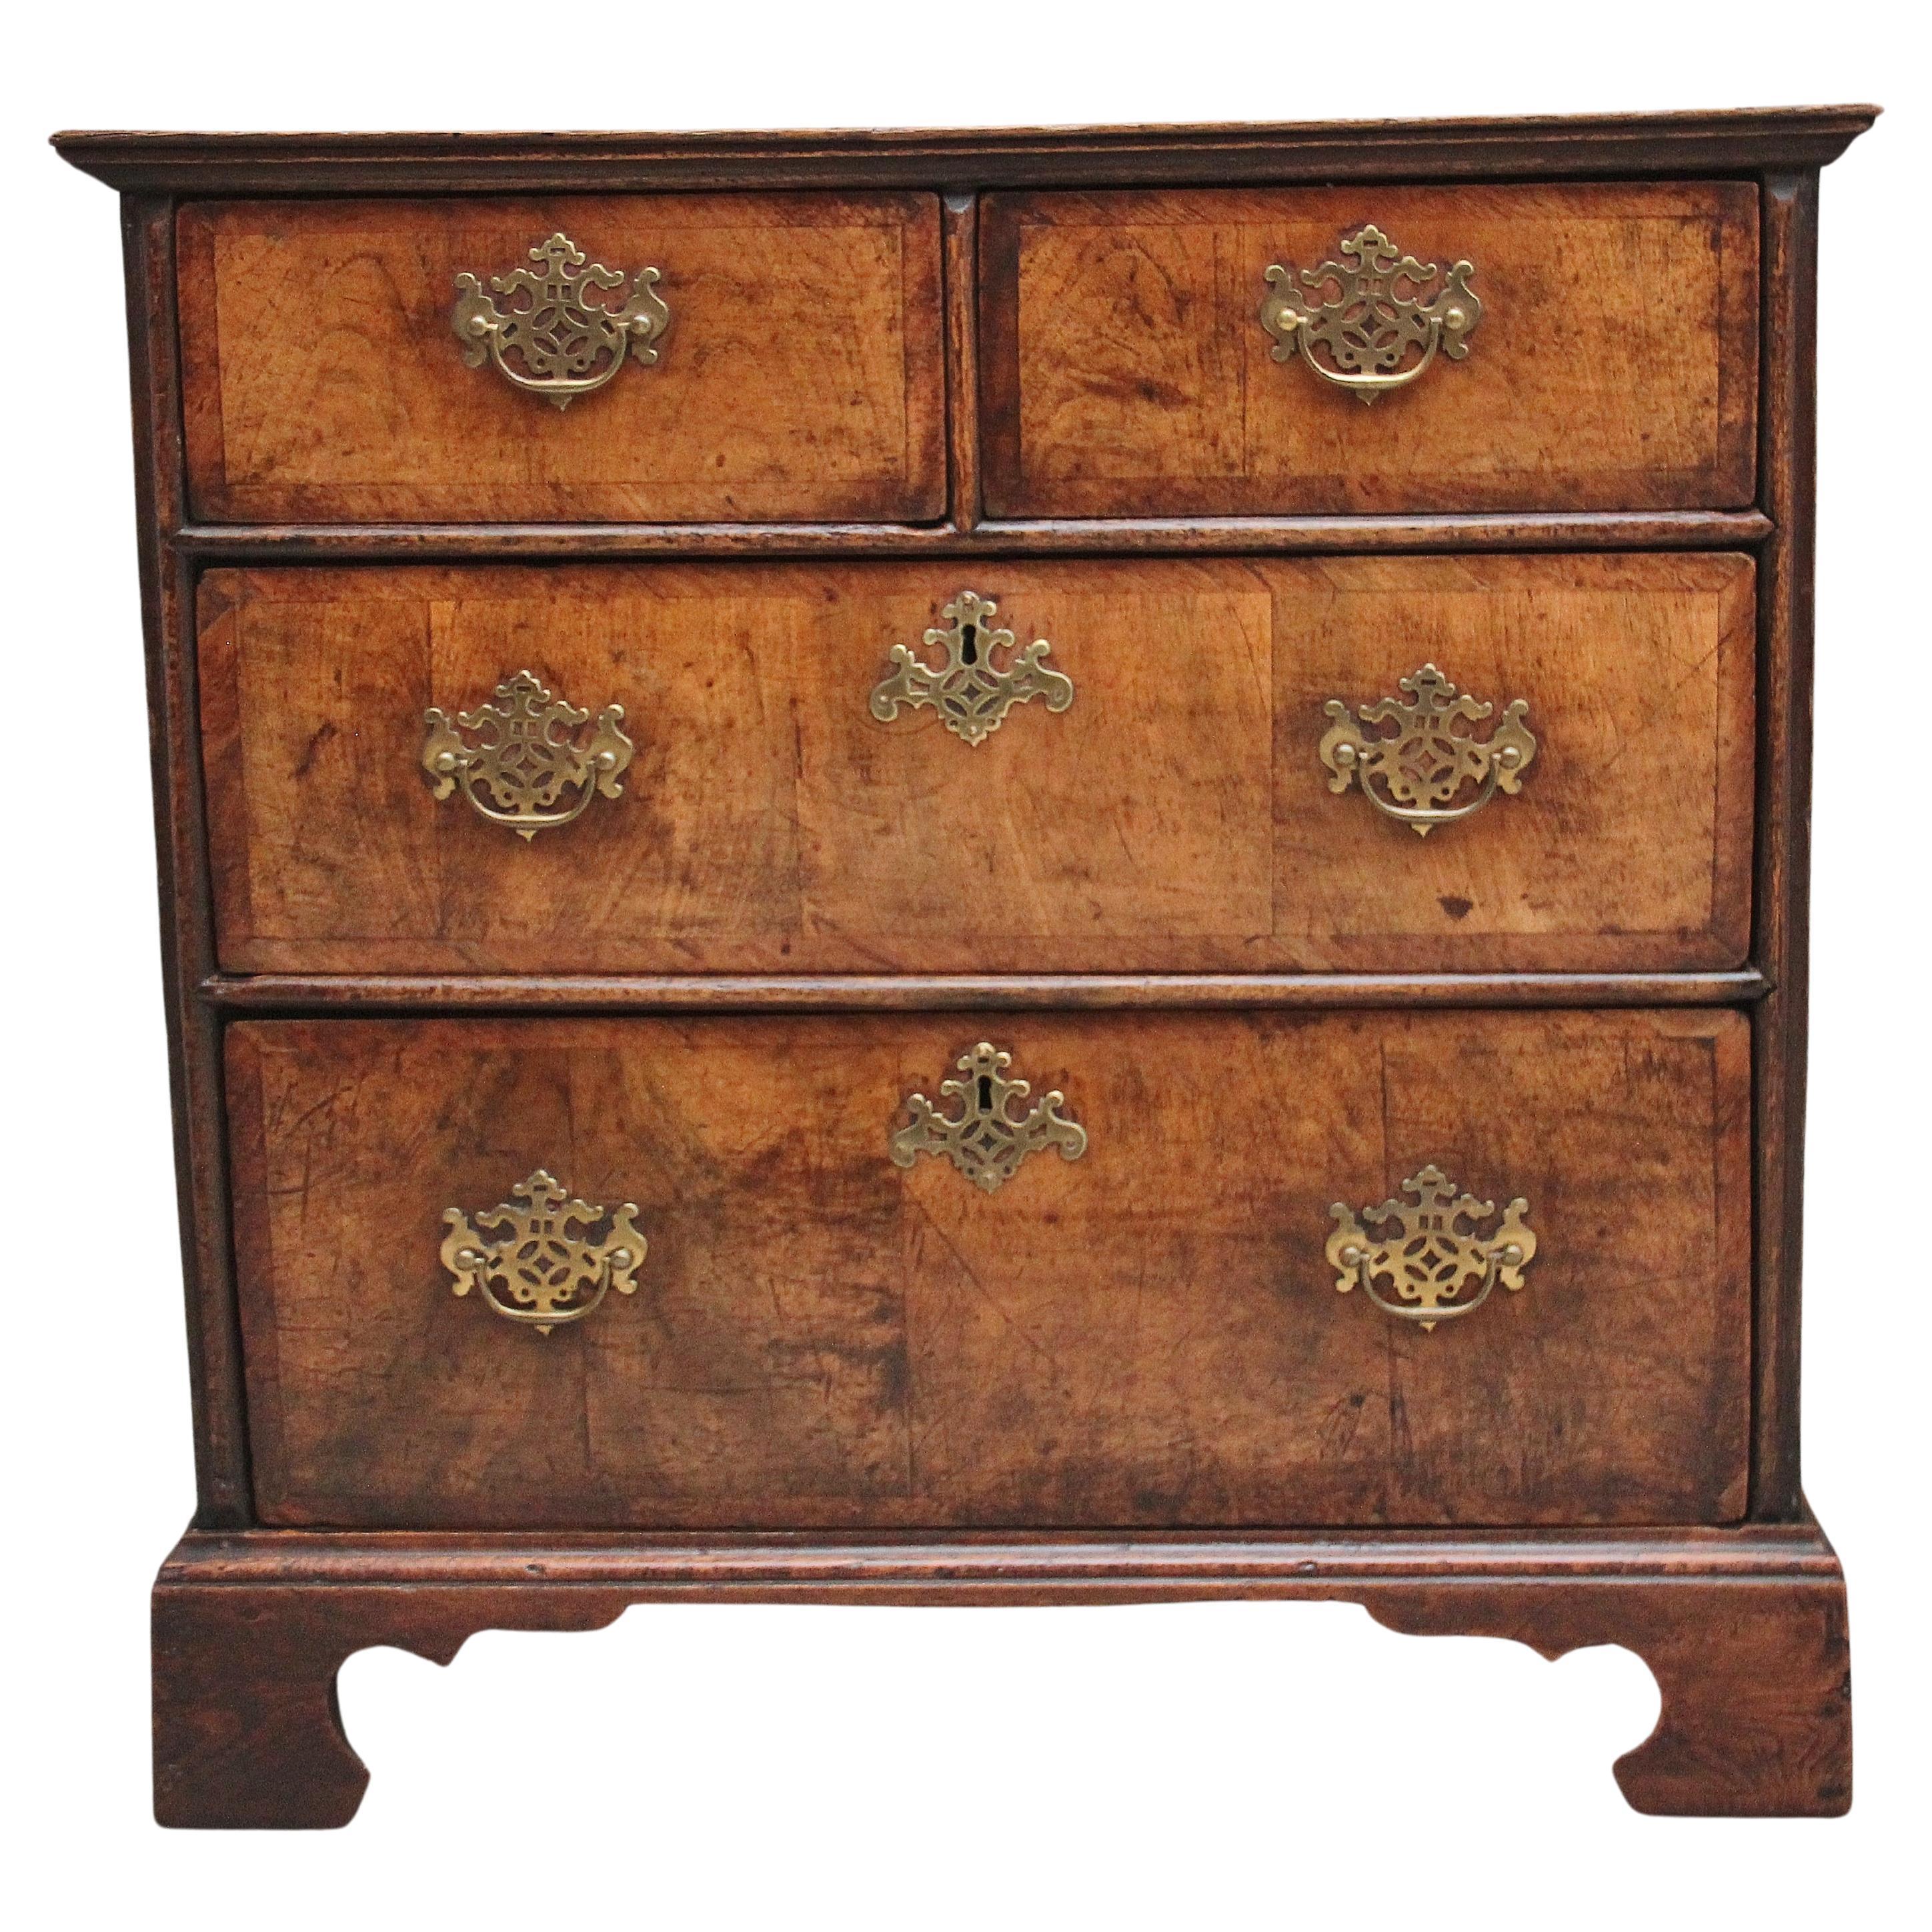 Early 18th Century walnut chest For Sale